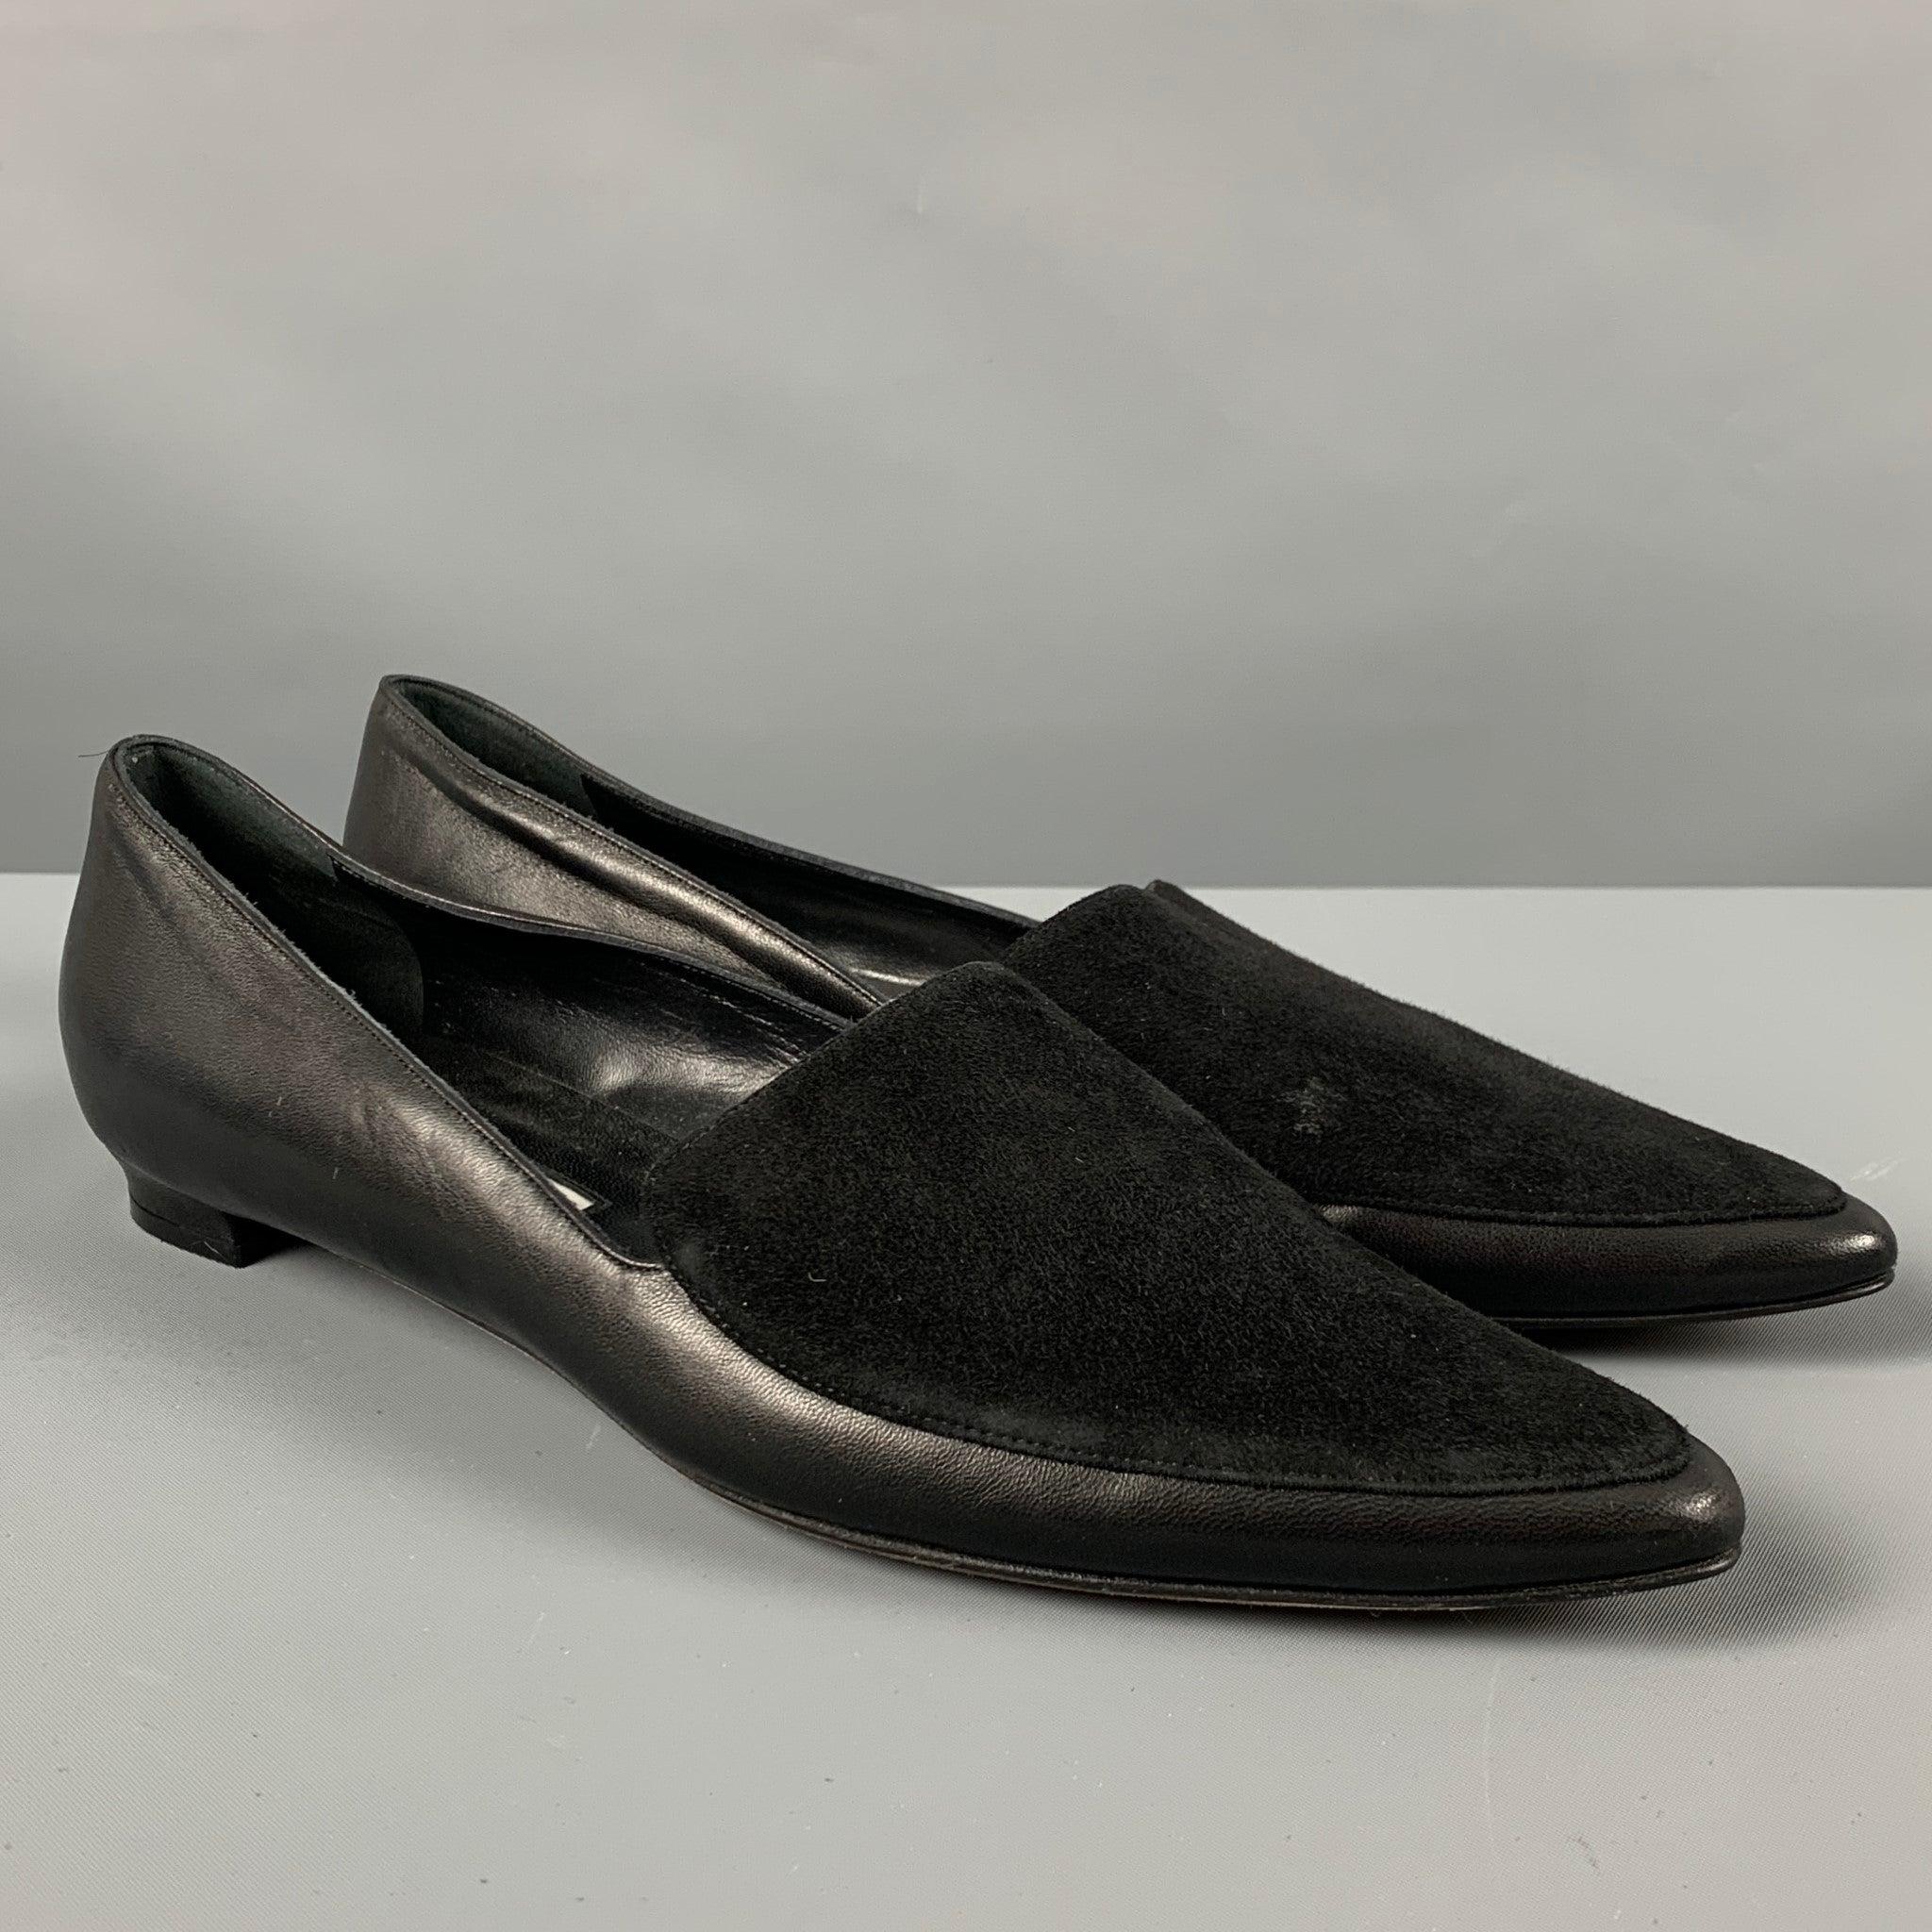 MANOLO BLAHNIK flats
in a black leather fabric with suede upper detail, featuring a pointed toe. Handmade in Italy.Very Good Pre-Owned Condition. Minor signs of wear. 

Marked:   40.5Outsole:11 inches  x 3.5 inches 
  
  
 
Reference: